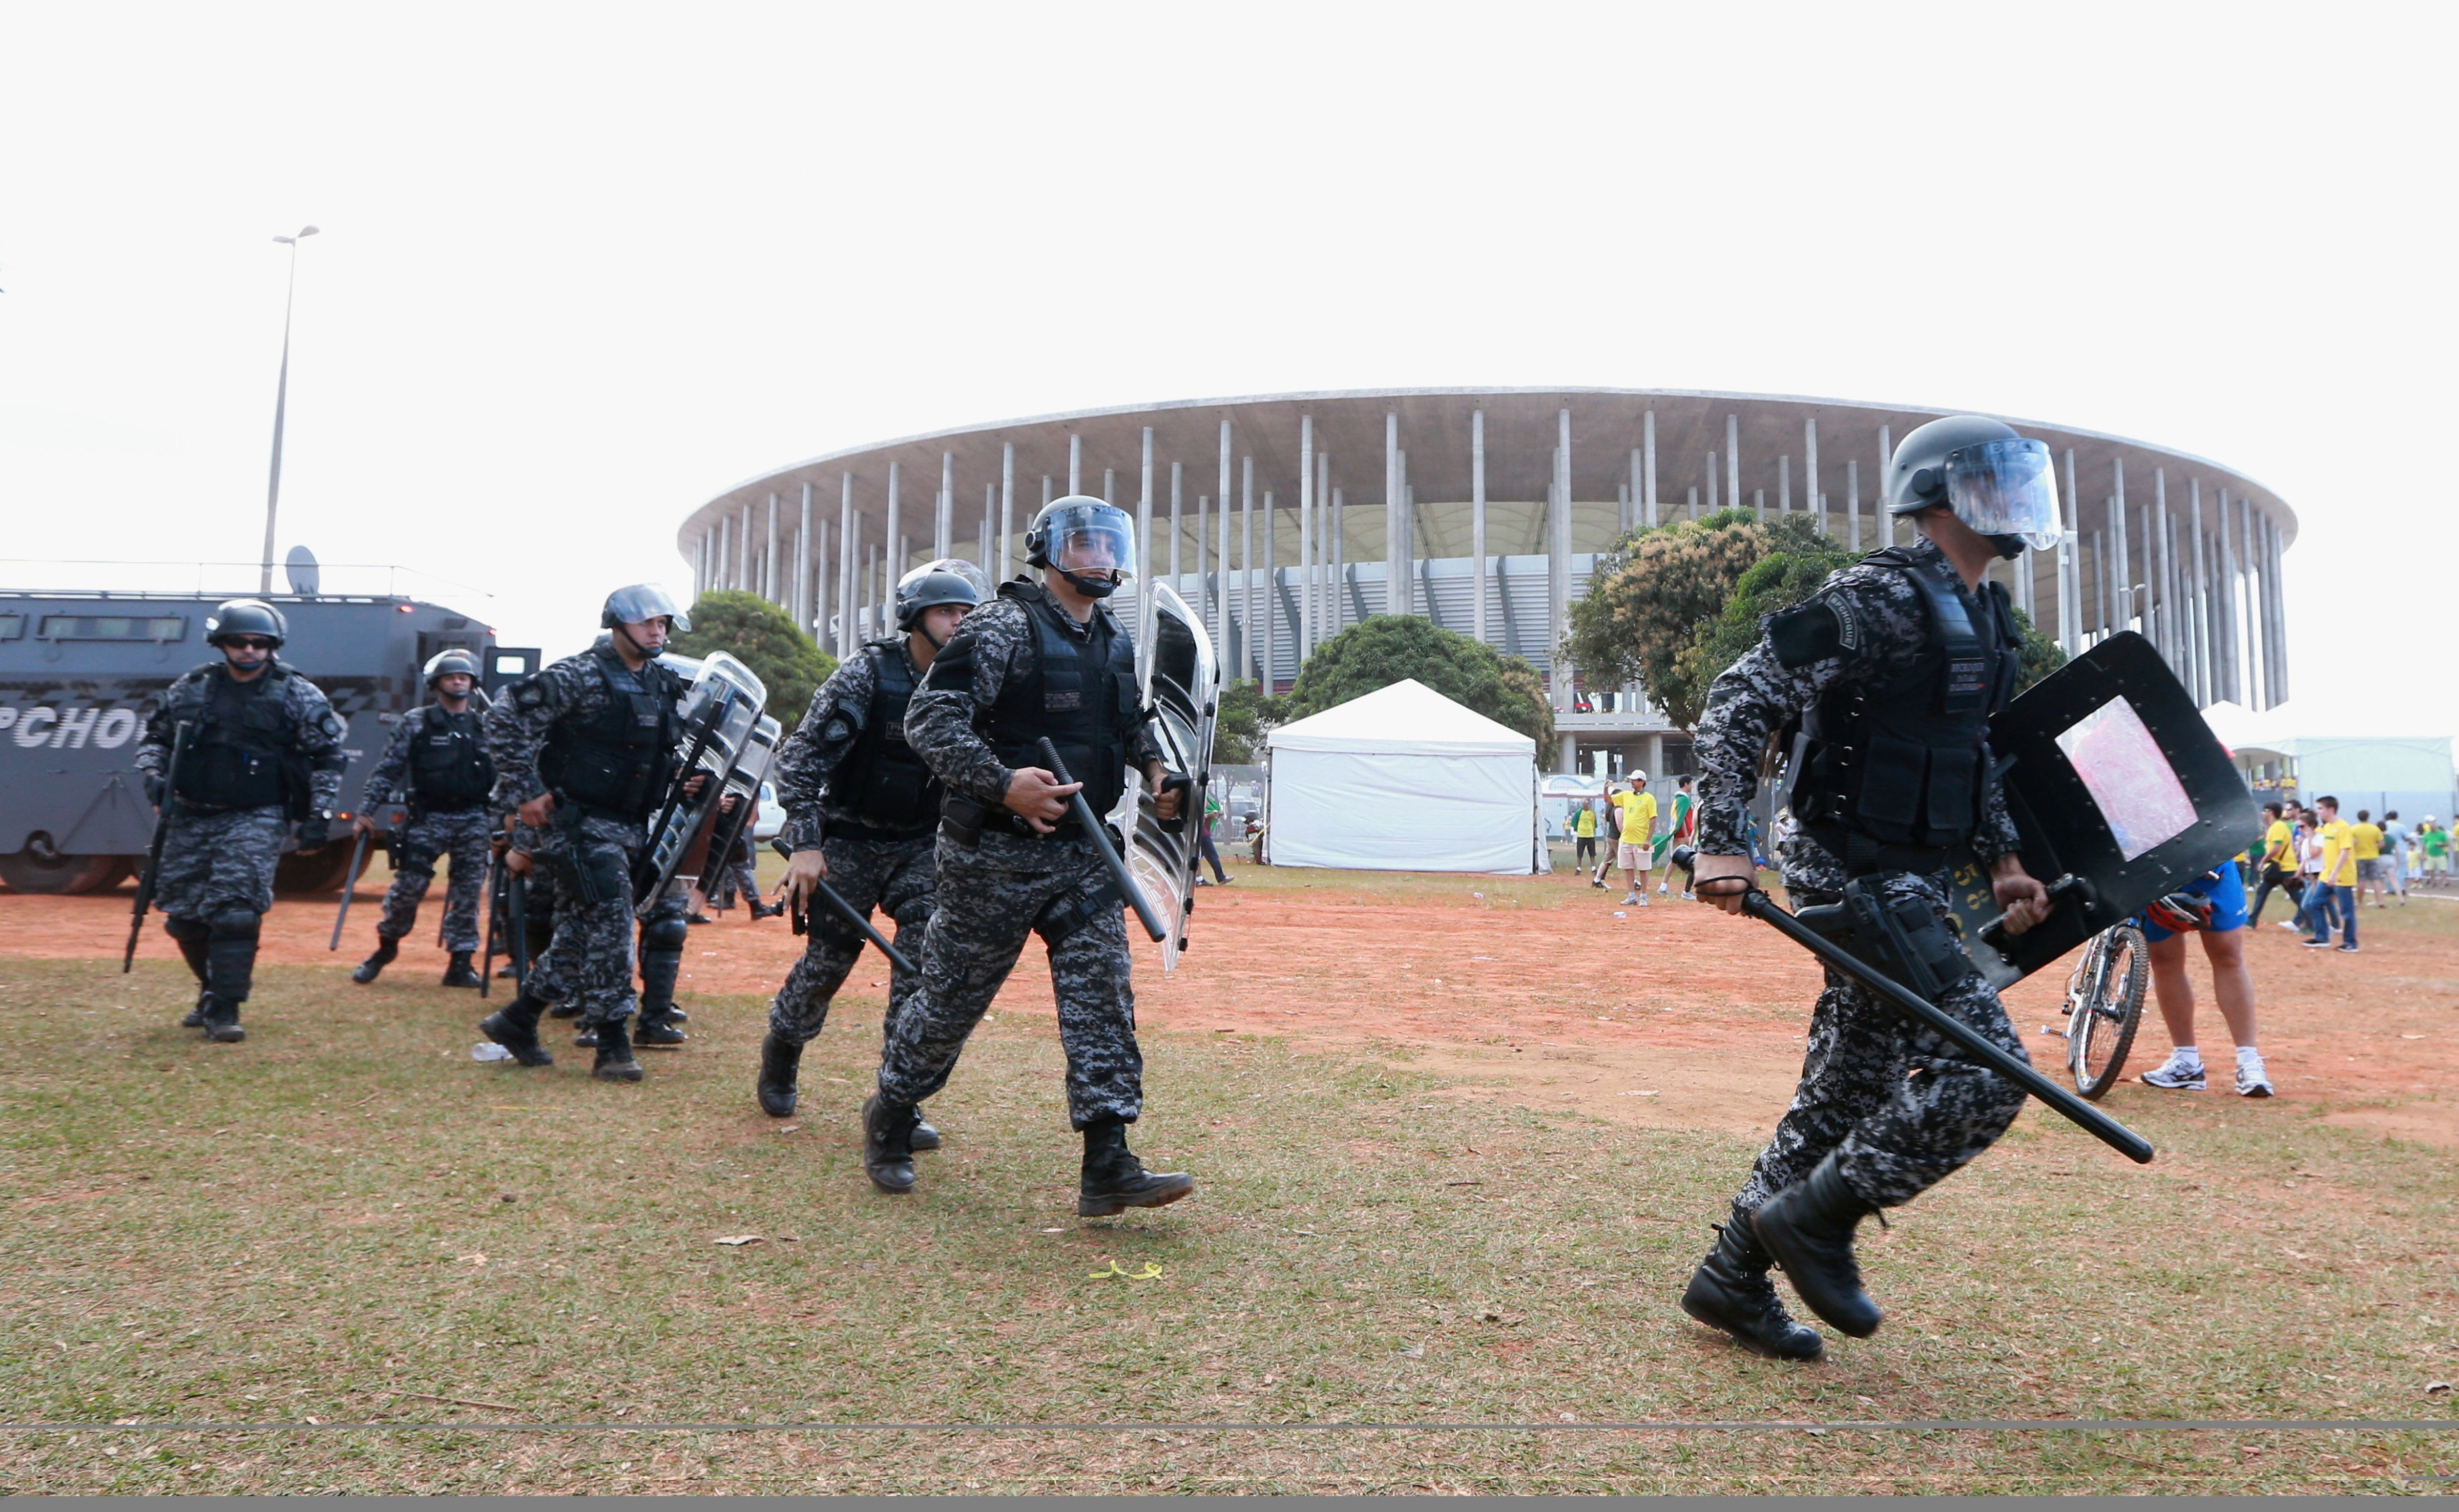 Security services patrol as protestors gather prior to the FIFA Confederations Cup Brazil 2013 Group A match between Brazil and Japan at National Stadium on June 15, 2013 (Scott Heavey—Getty Images)